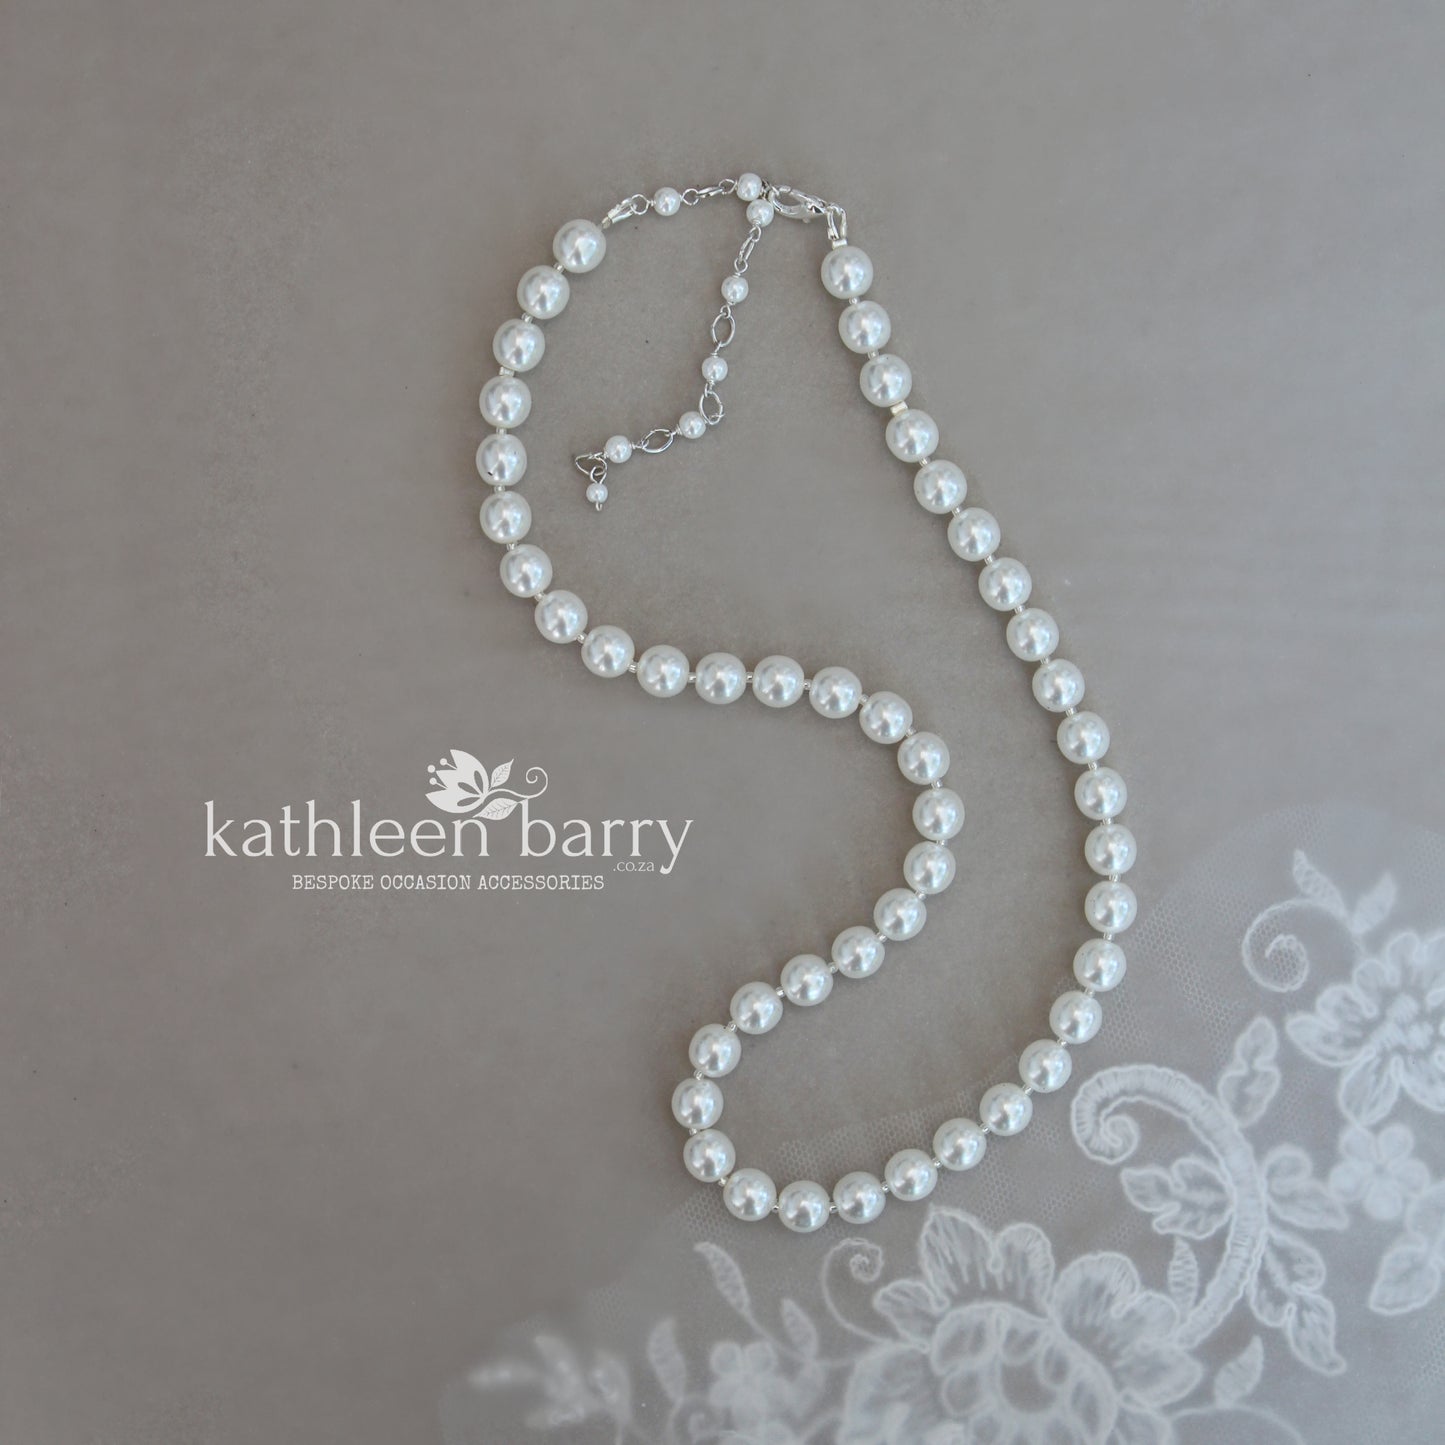 Gayaat Simple pearl necklace - 8mm Czech glass pearls available in 3 pearl color options with extension chain